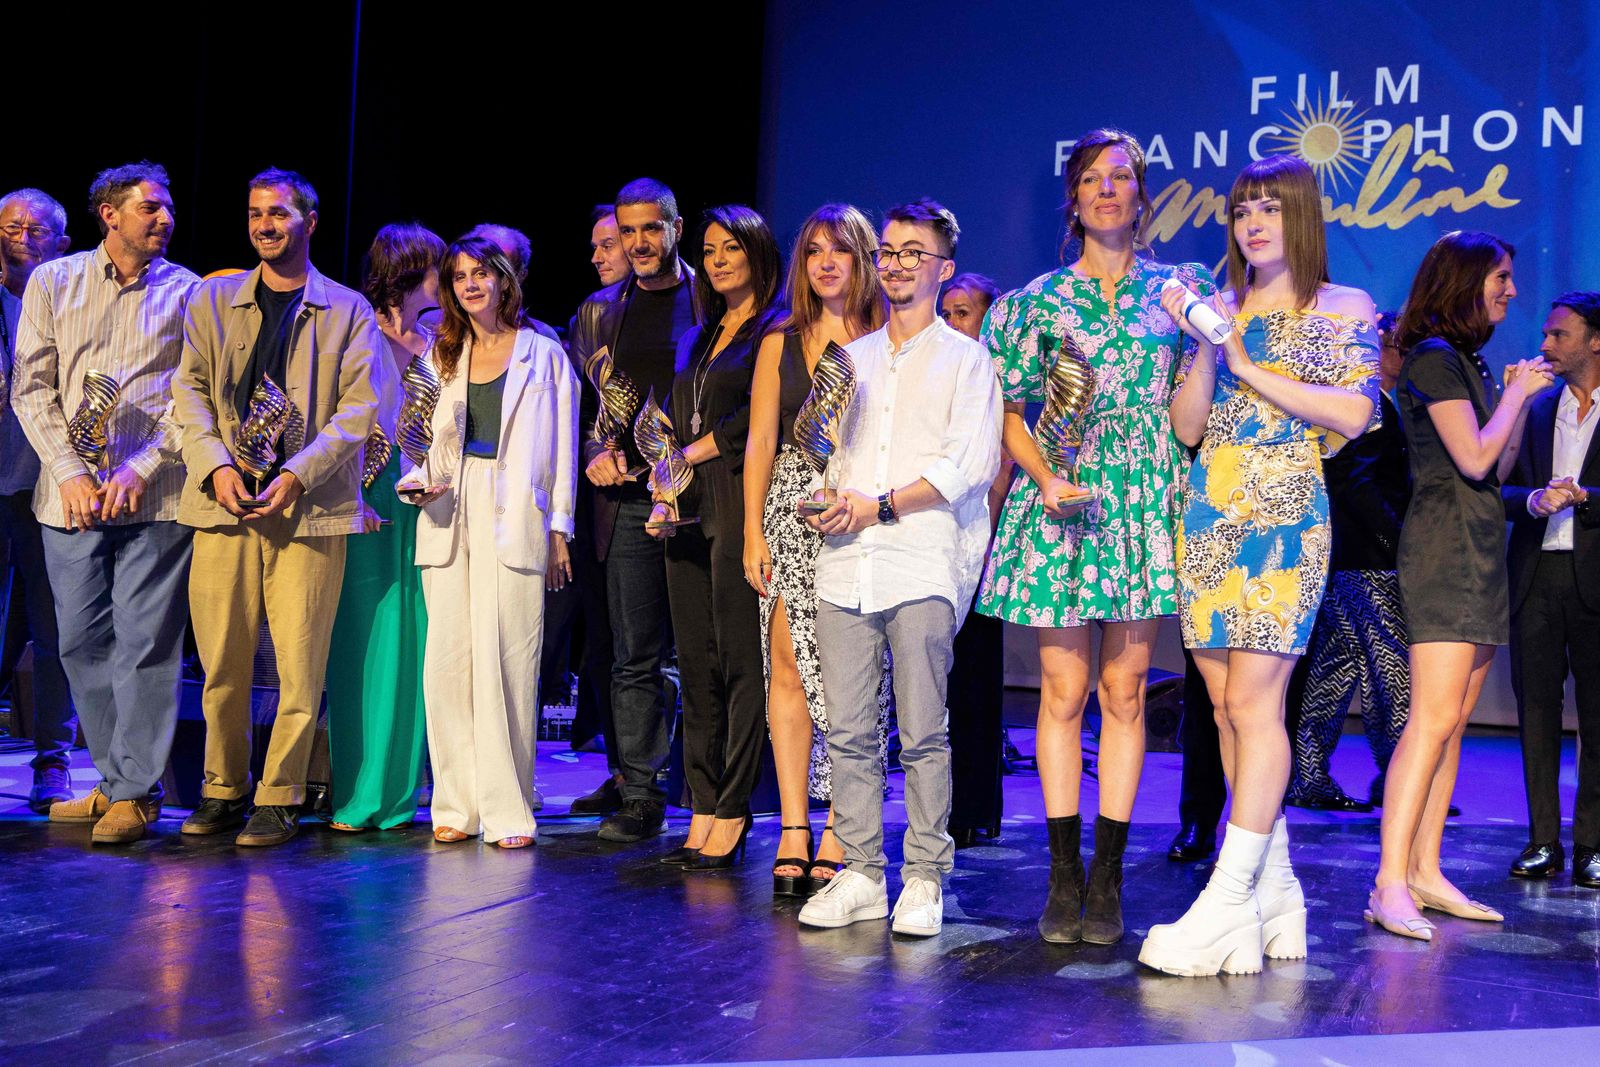 The prize-winners pose during the closing ceremony of the 15th Francophone Angouleme film festival in Angouleme, western France, on August 28, 2022. (Photo by YOHAN BONNET / AFP) - AFP